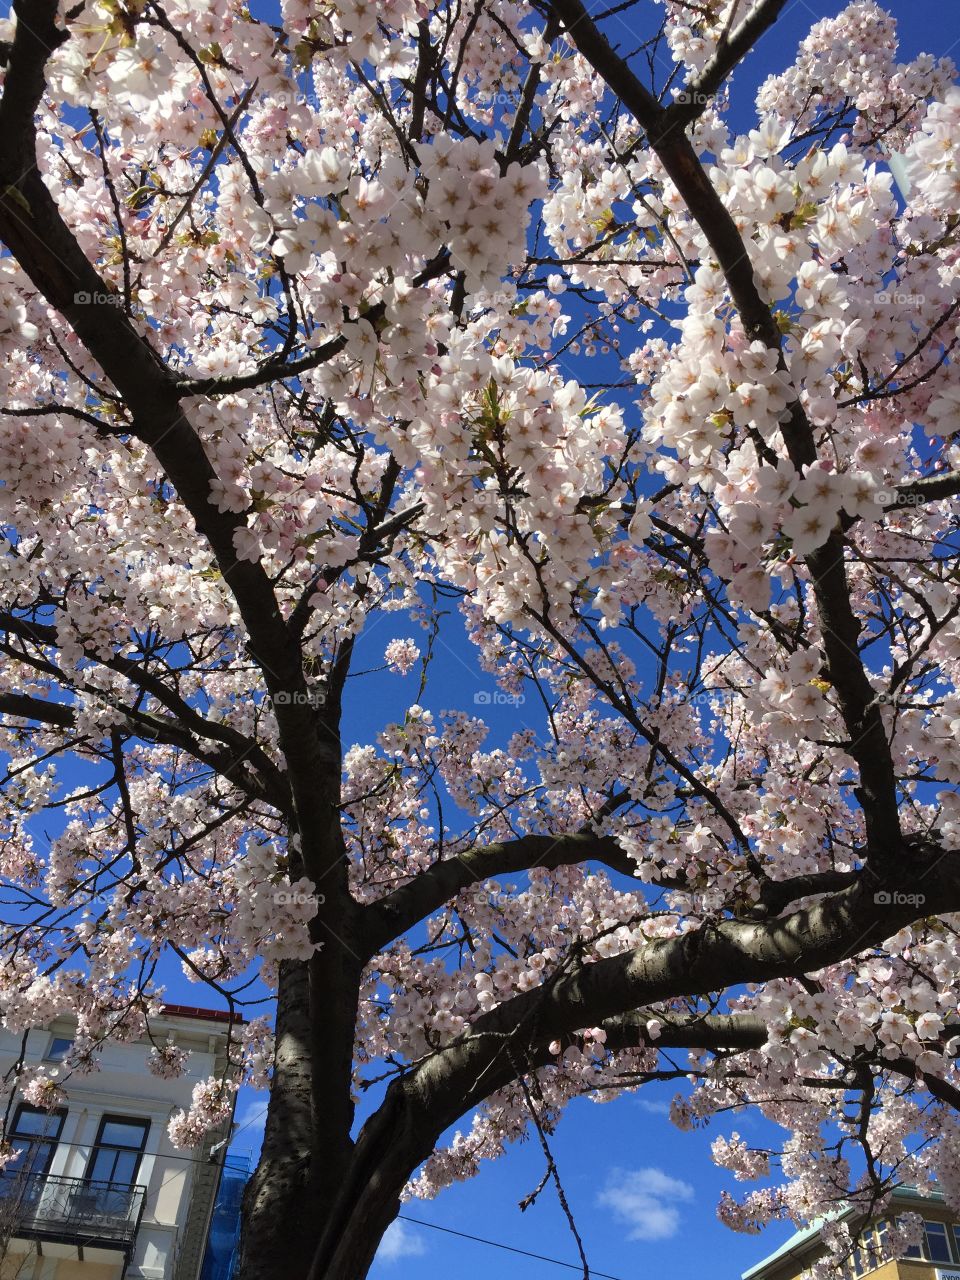 Low angle view of cheery blossom tree